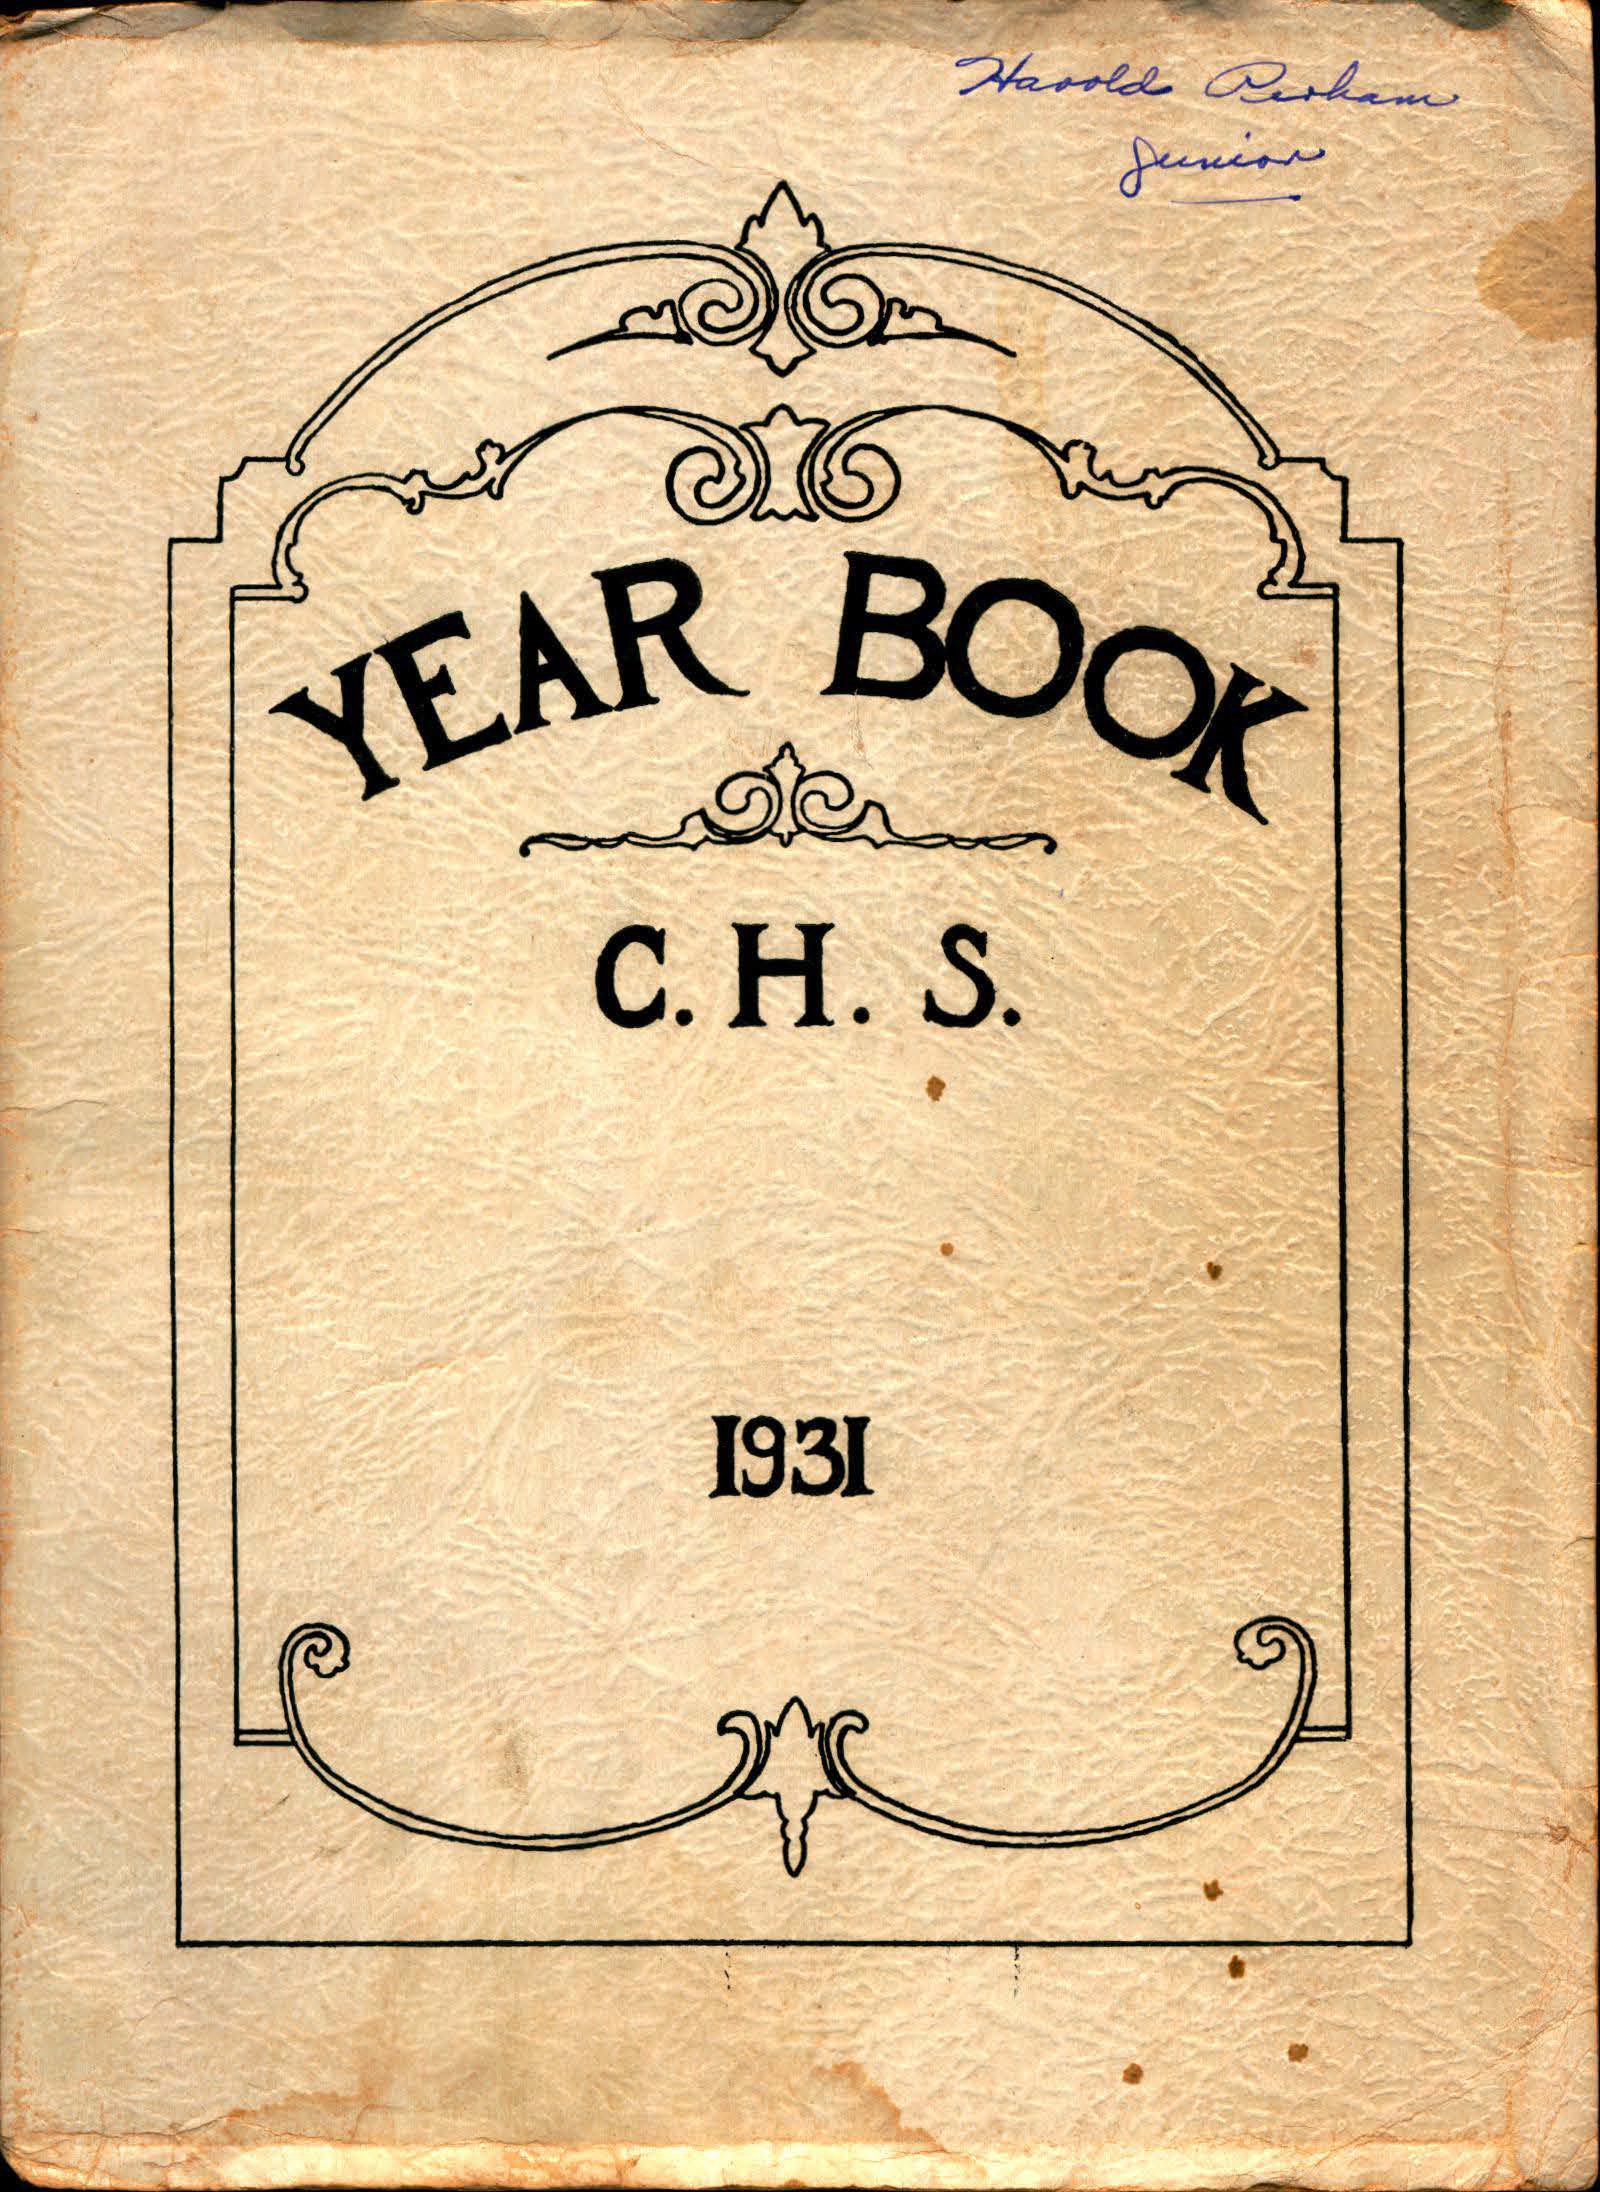 1931 Chelmsford High Yearbook 1